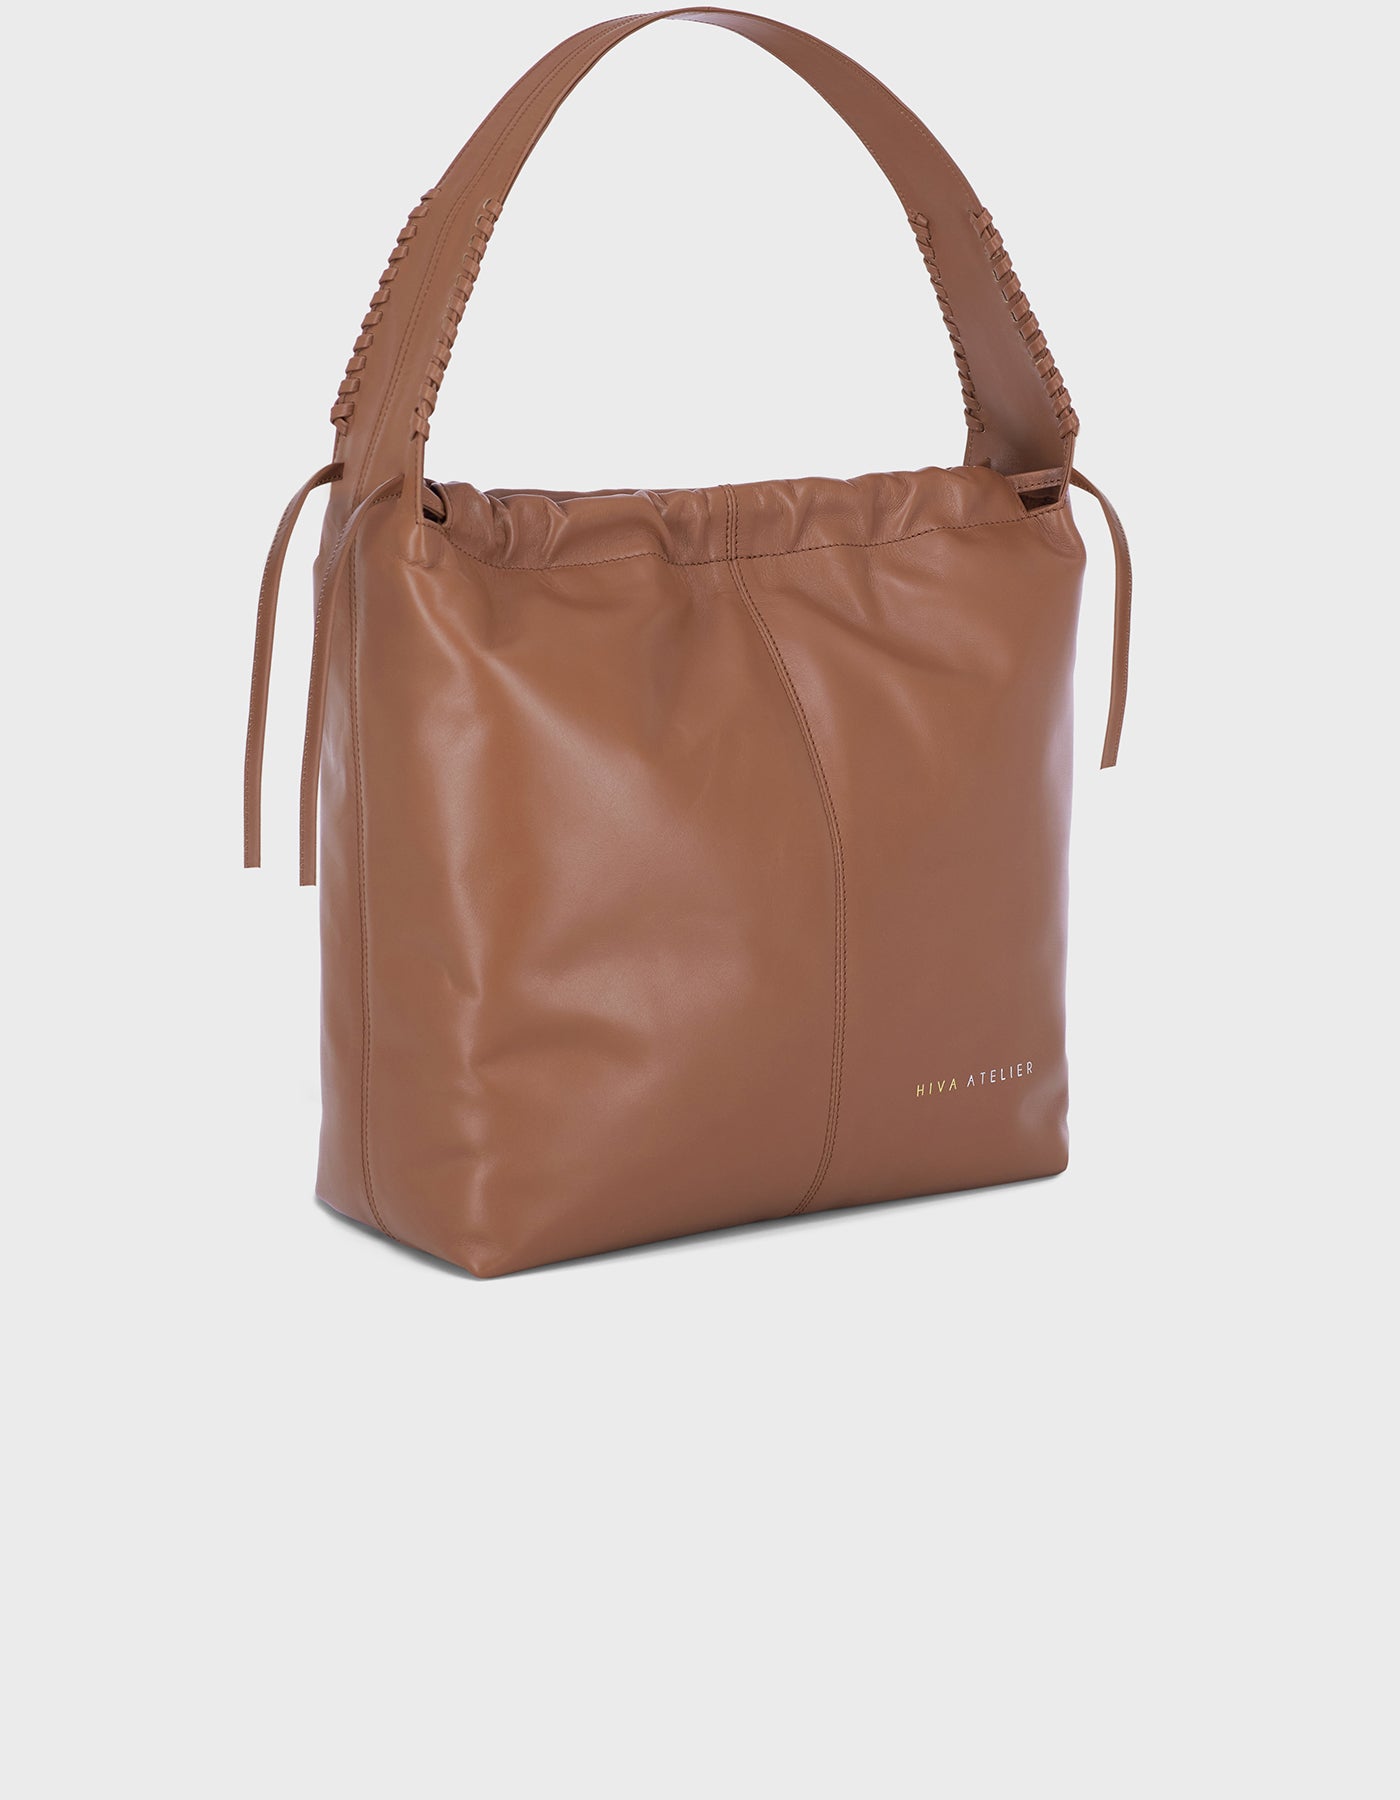 Hiva Atelier | All Day Shopping Bag Smooth Wood | Beautiful and Versatile